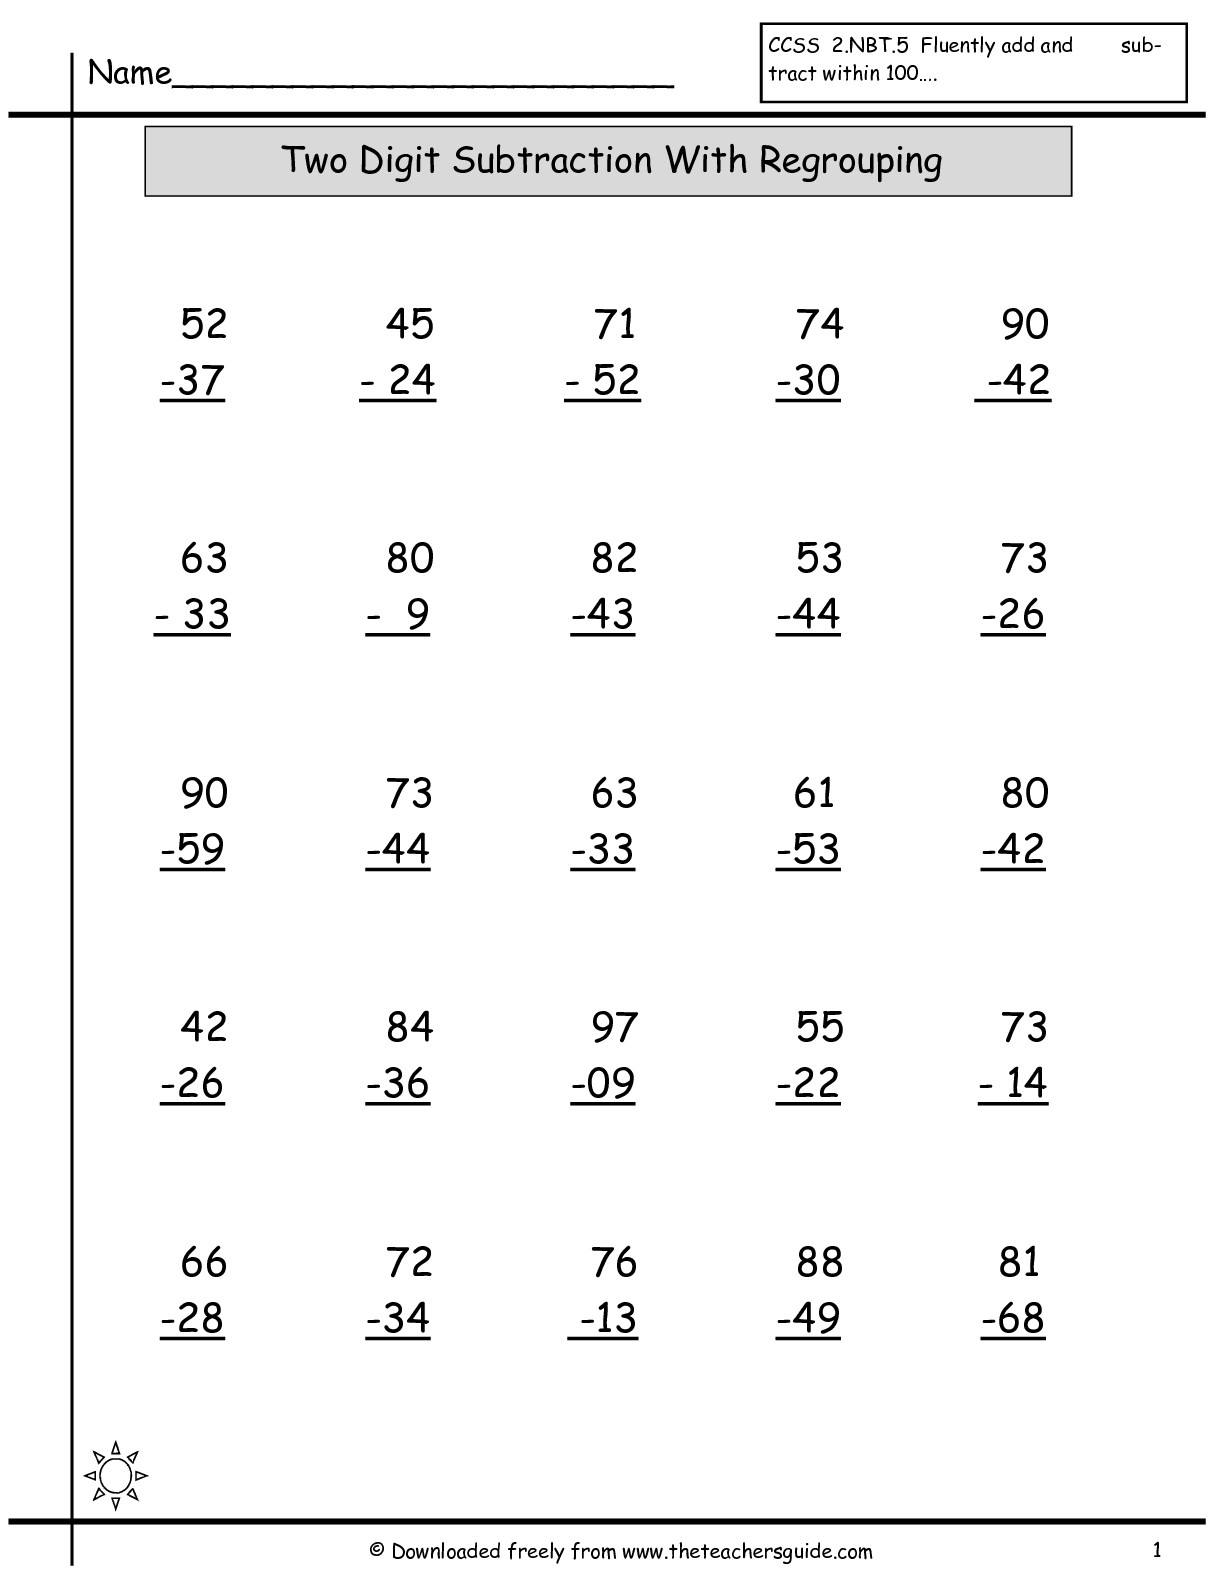 13-best-images-of-4-digit-numbers-addition-worksheets-addition-worksheets-grade-3-4-digit